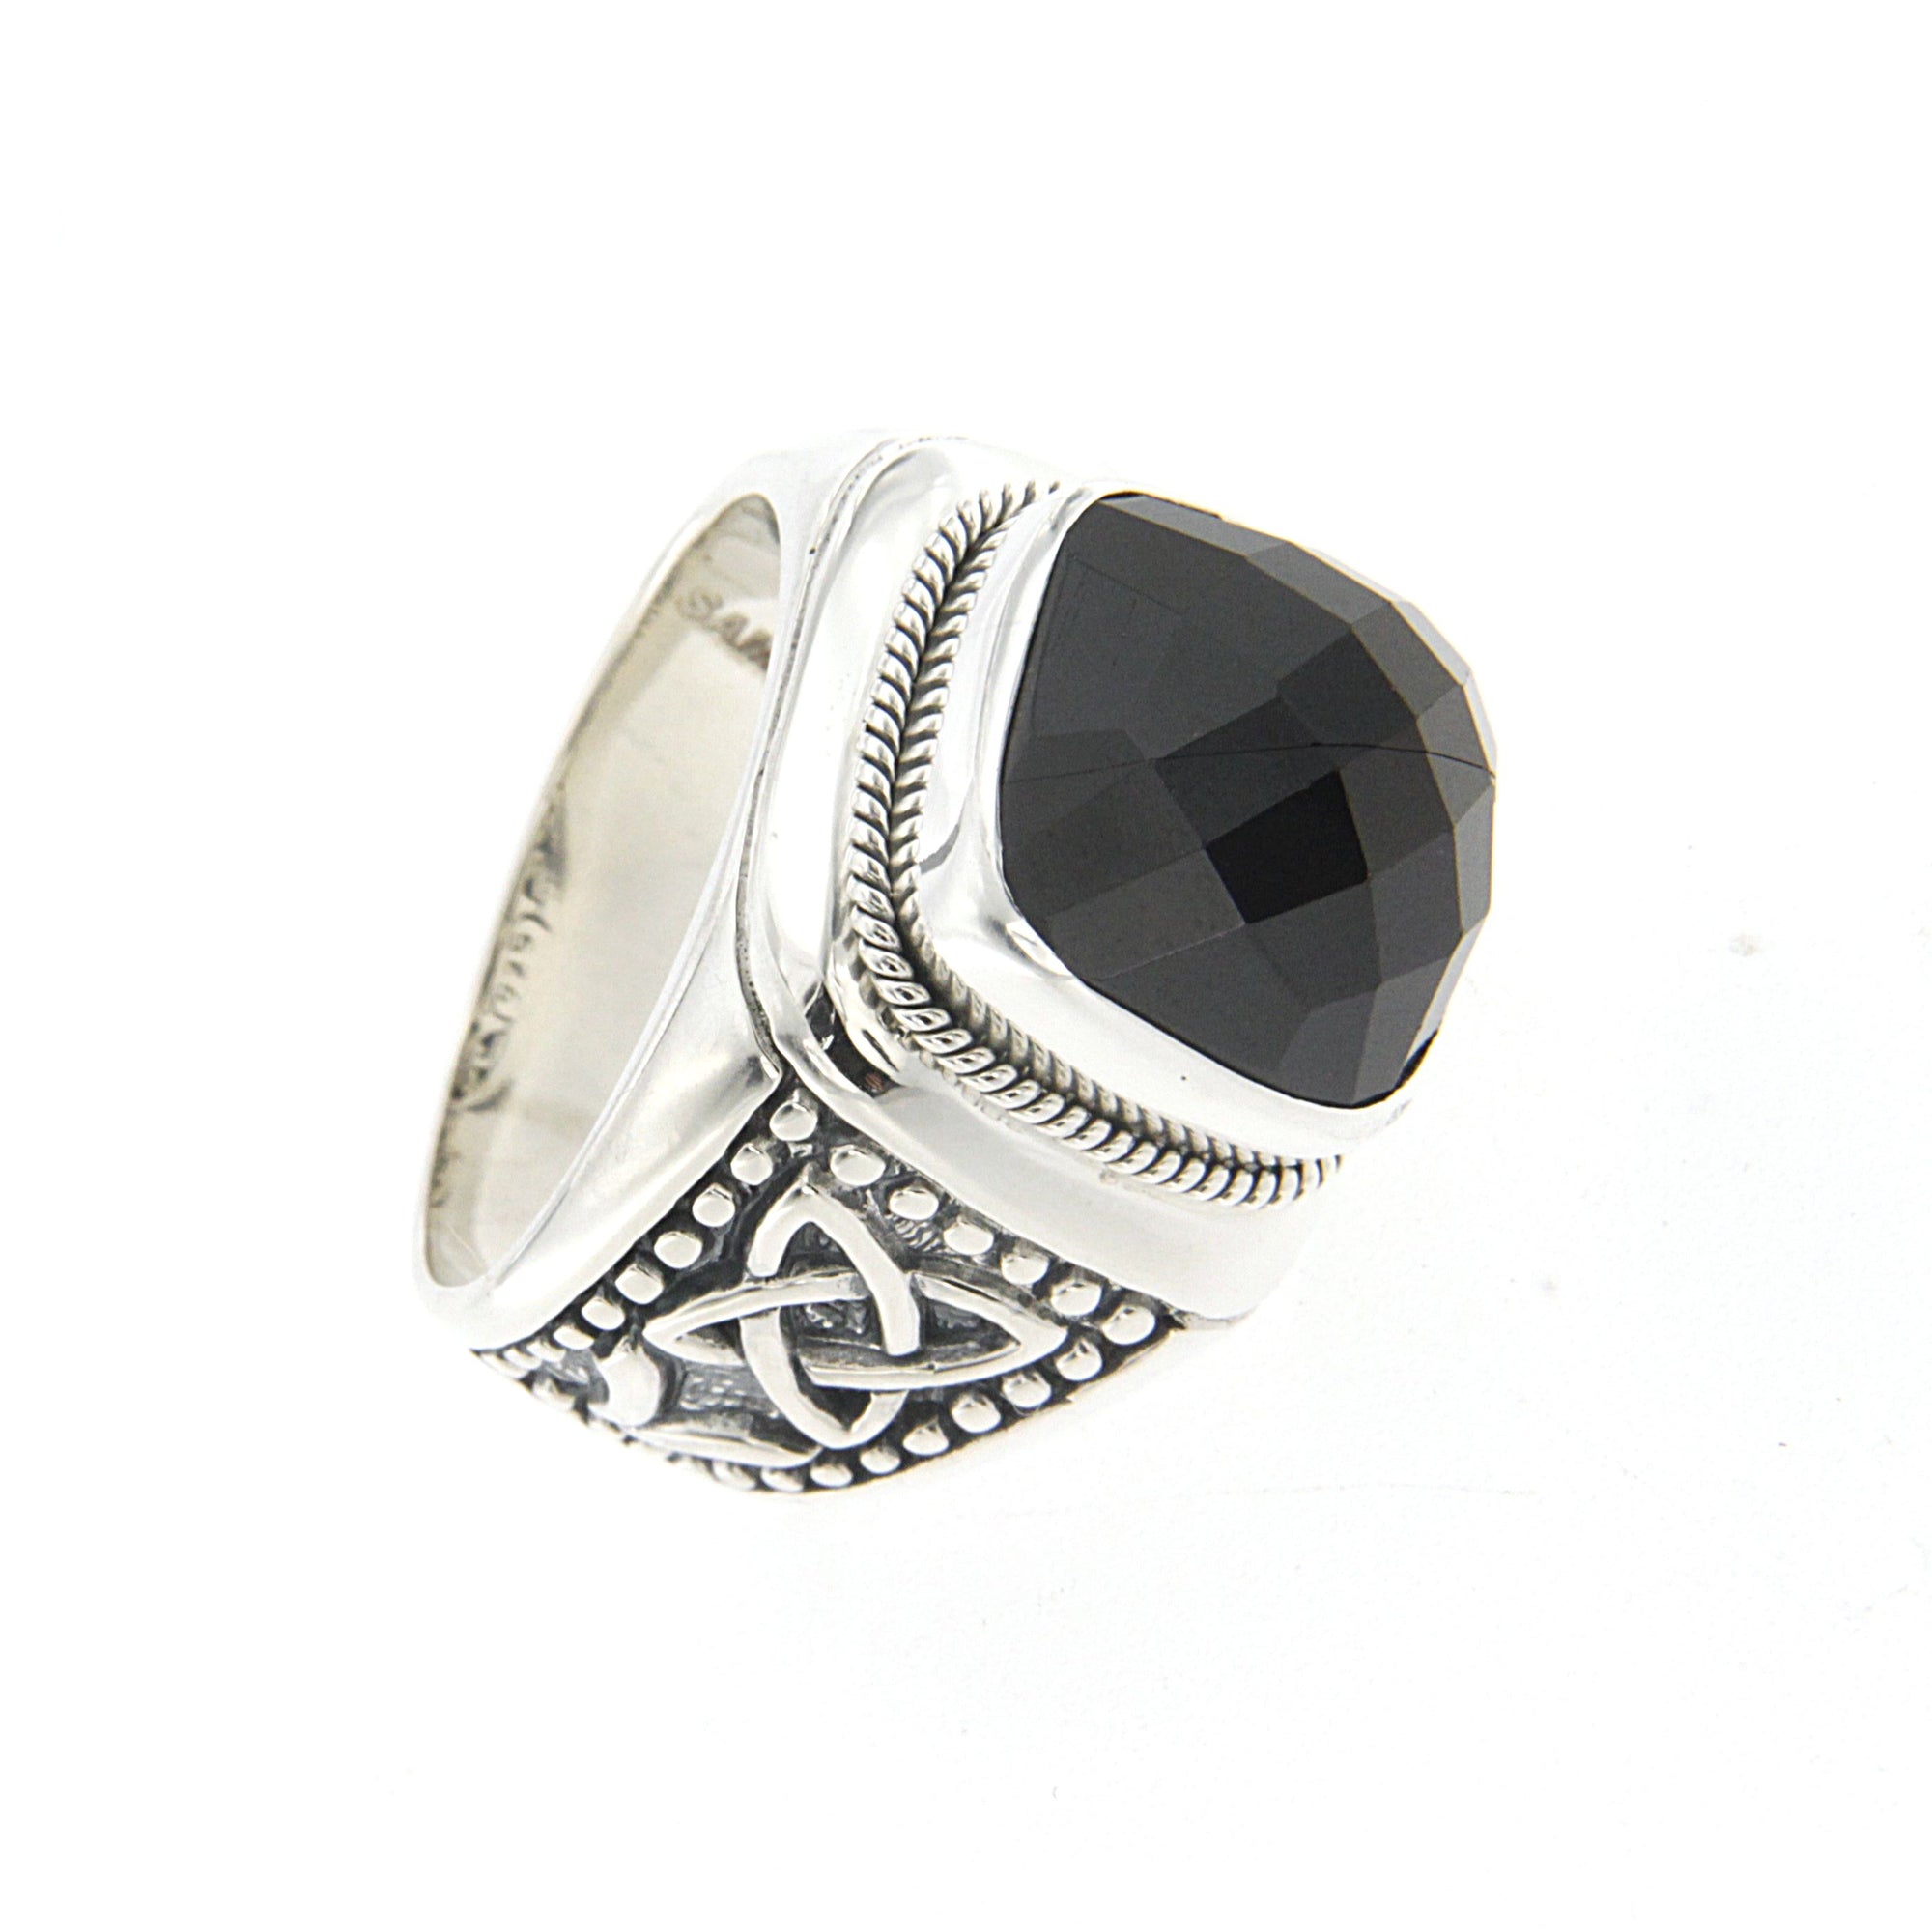 Onyx Kashmir Ring available at Talisman Collection Fine Jewelers in El Dorado Hills, CA and online. Specs: Onyx Kashmir Ring features a cushion-cut onyx and is set in Sterling Silver. 